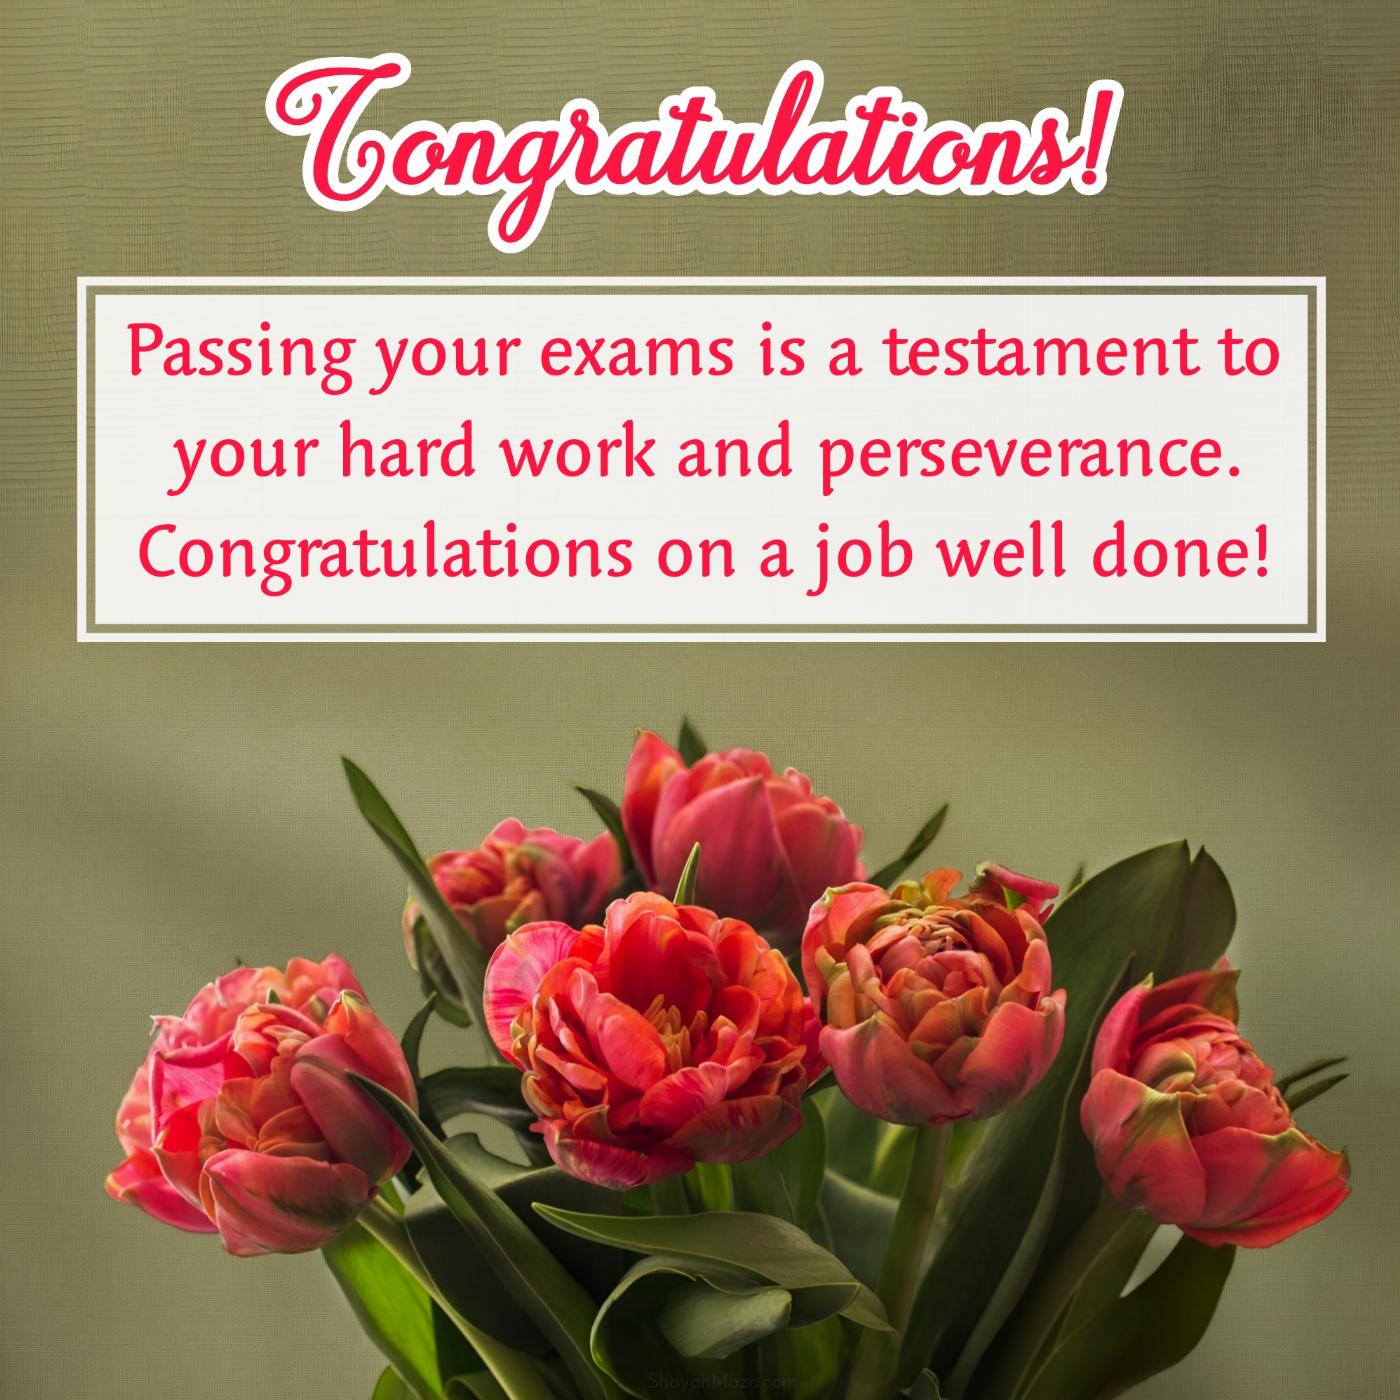 Passing your exams is a testament to your hard work